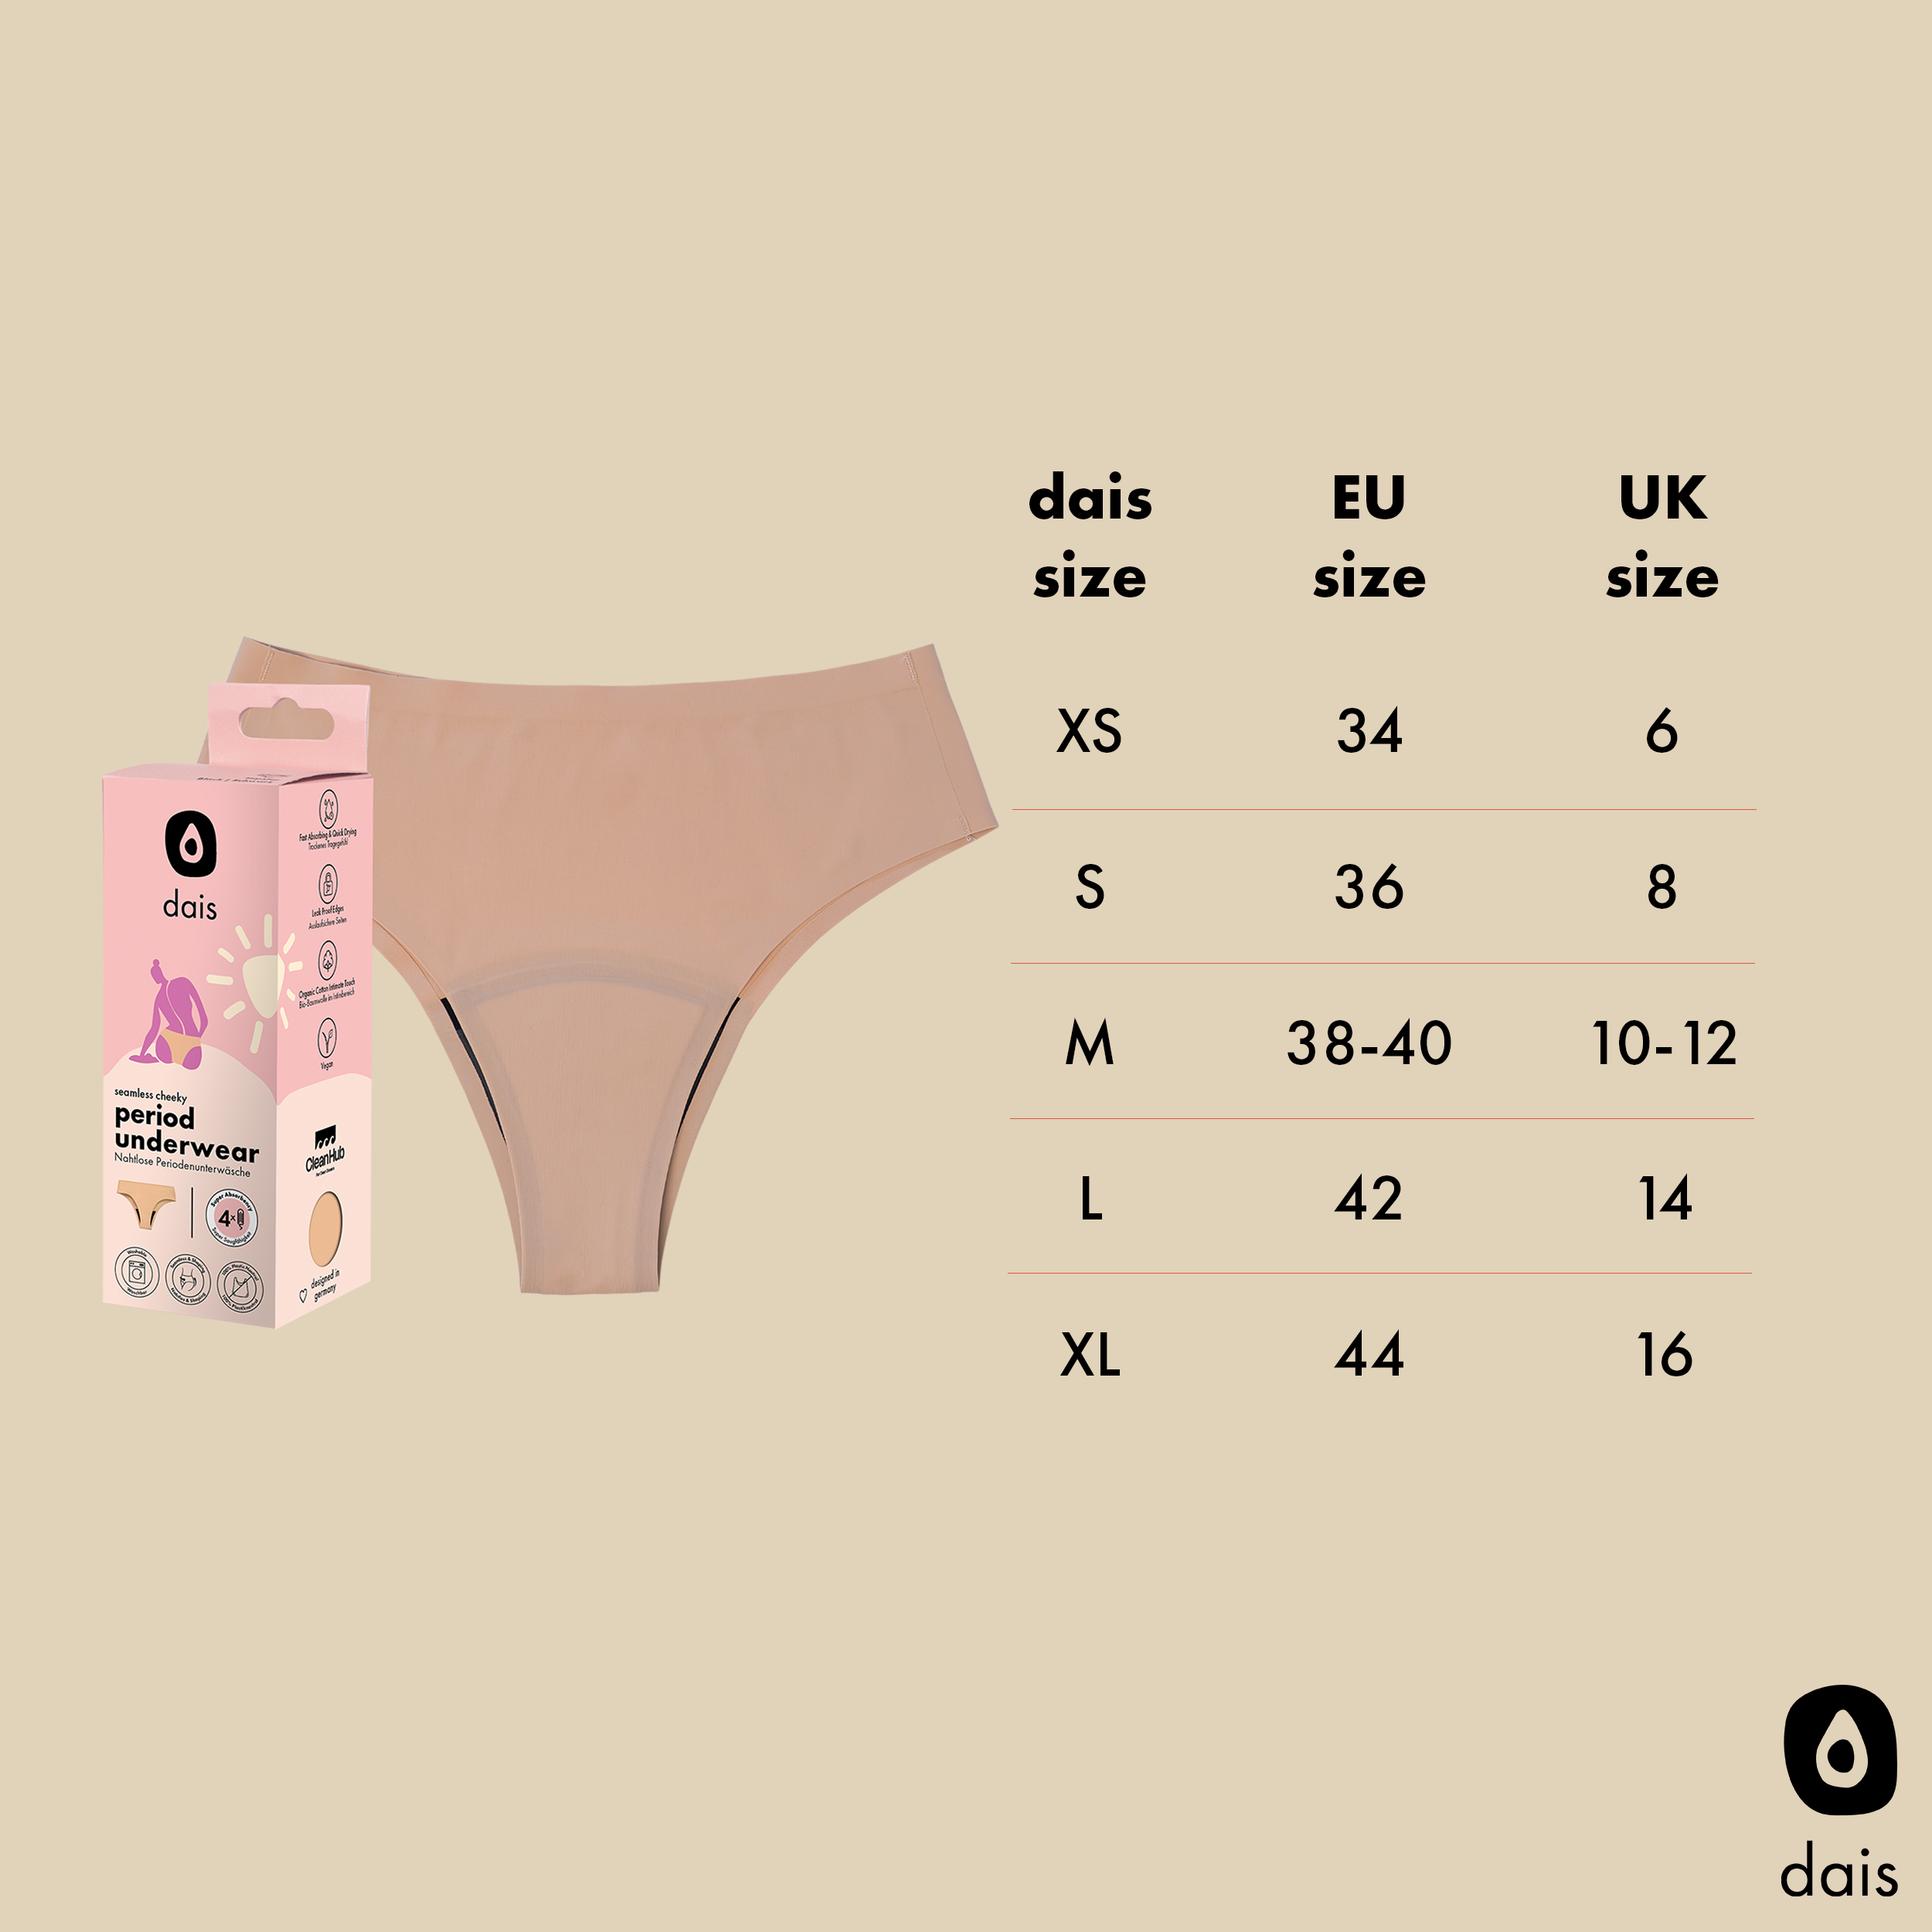 Size chart for dais period underwear in cheeky cut in beige showing the size options of XS, S, M, L, XL with EU and UK conversions.